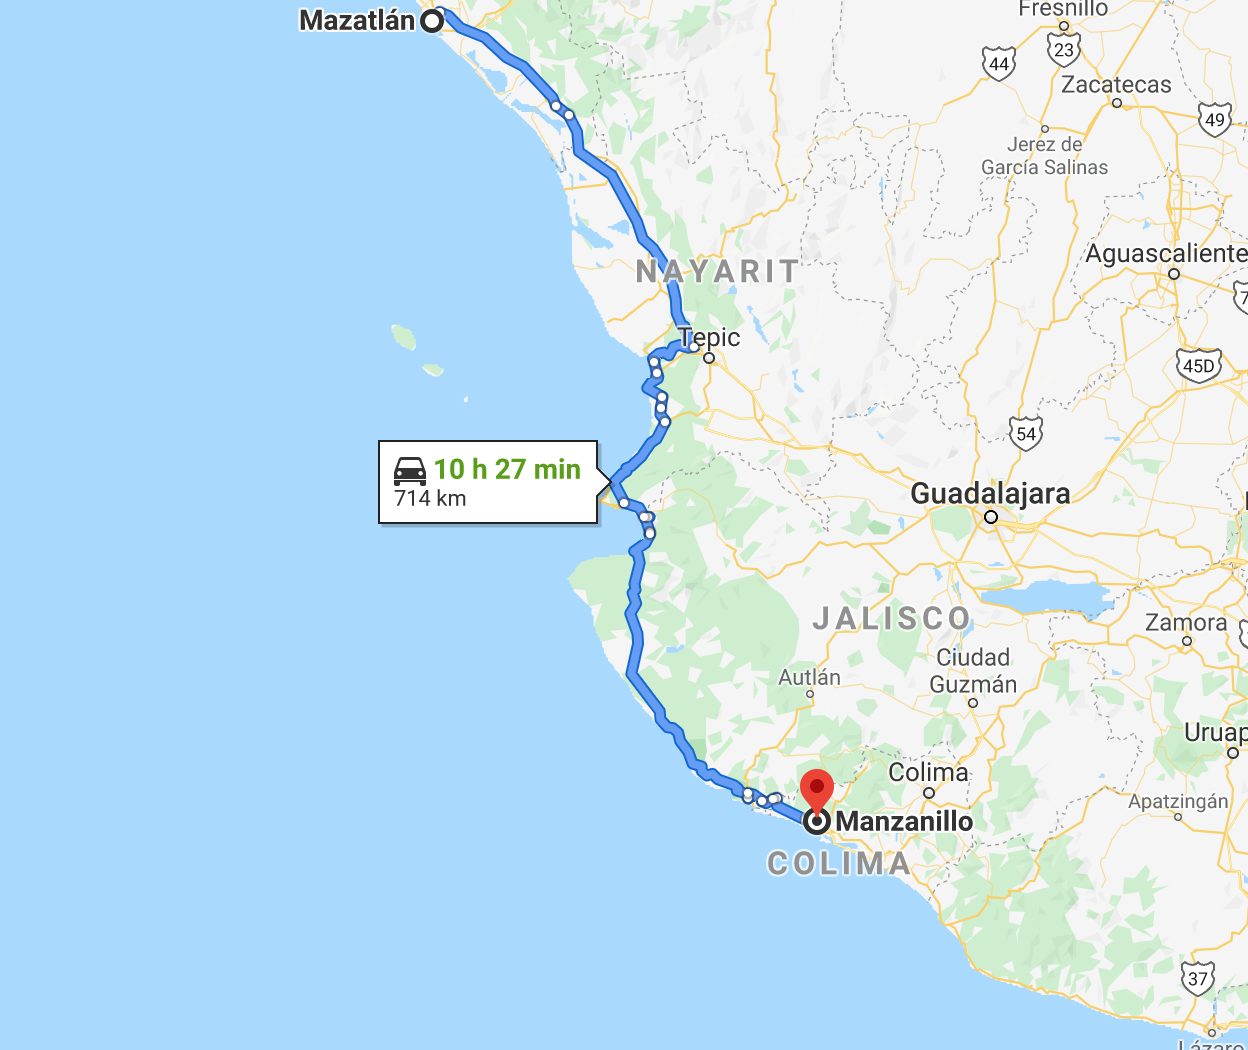 Travel Roadmap – Driving to Mexico - West Coast Route from Canada to the Oaxaca Coast